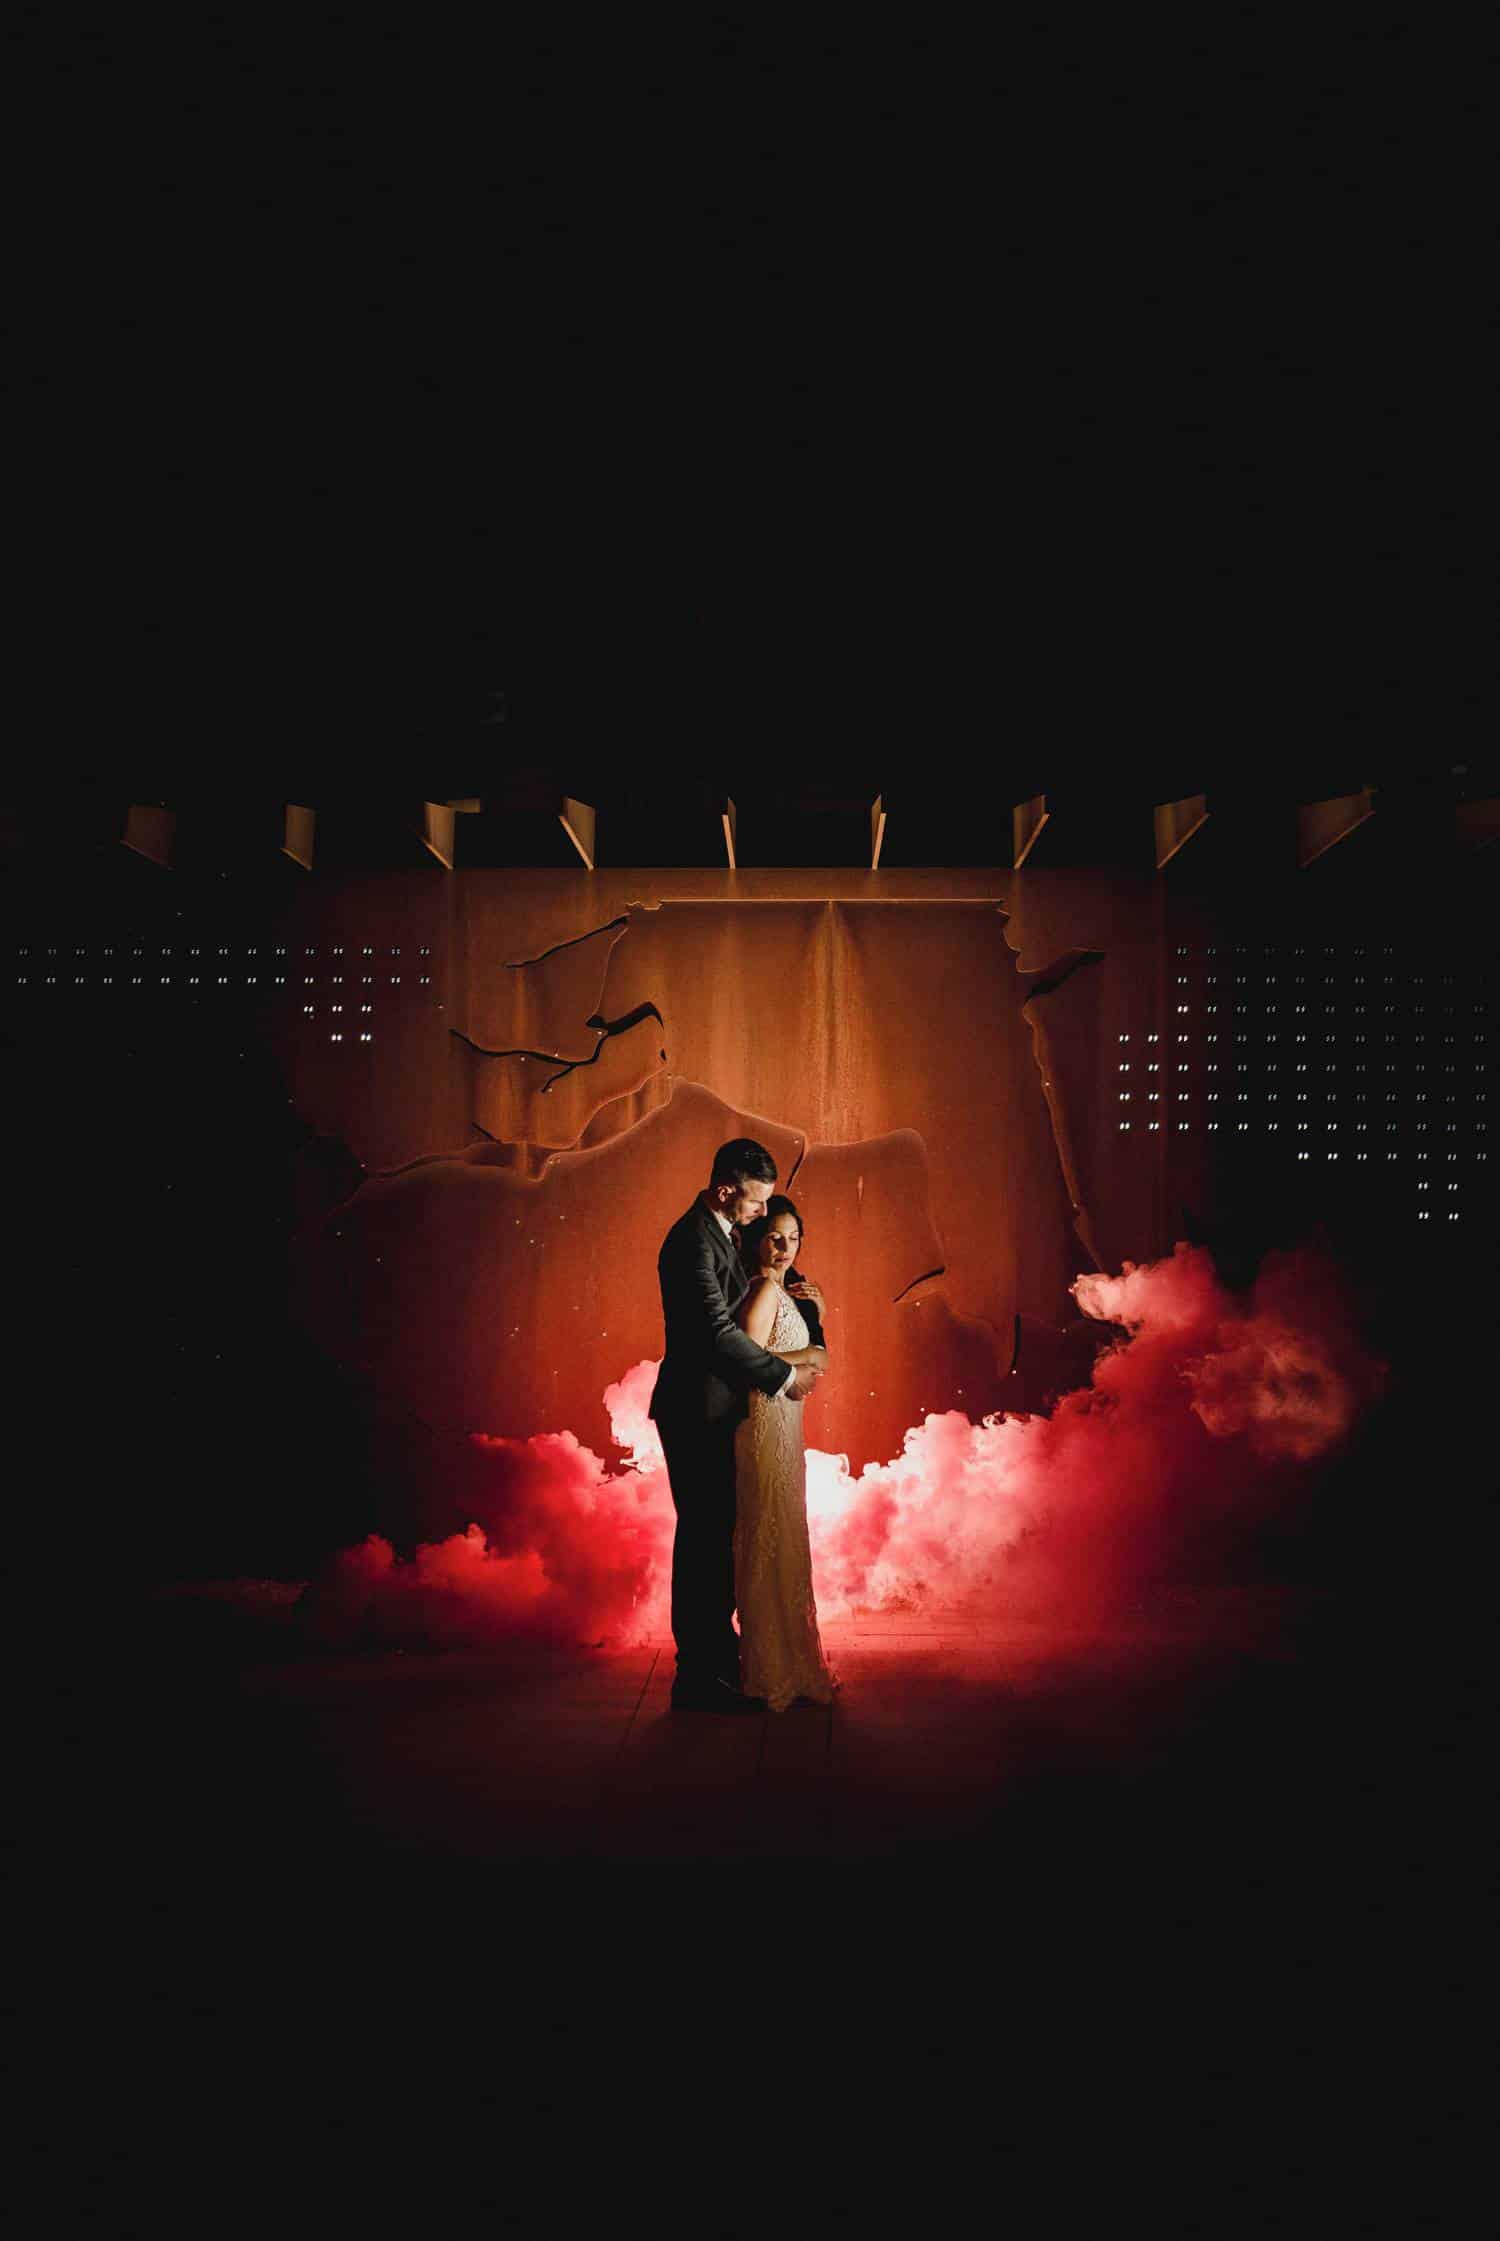 A modern, angular background is emphasized by red smoke that filters behind a bride and groom, who stand back-to-front looking toward the ground. Black & Gold Photography are known for making immaculate wedding portraits using off-camera flash.